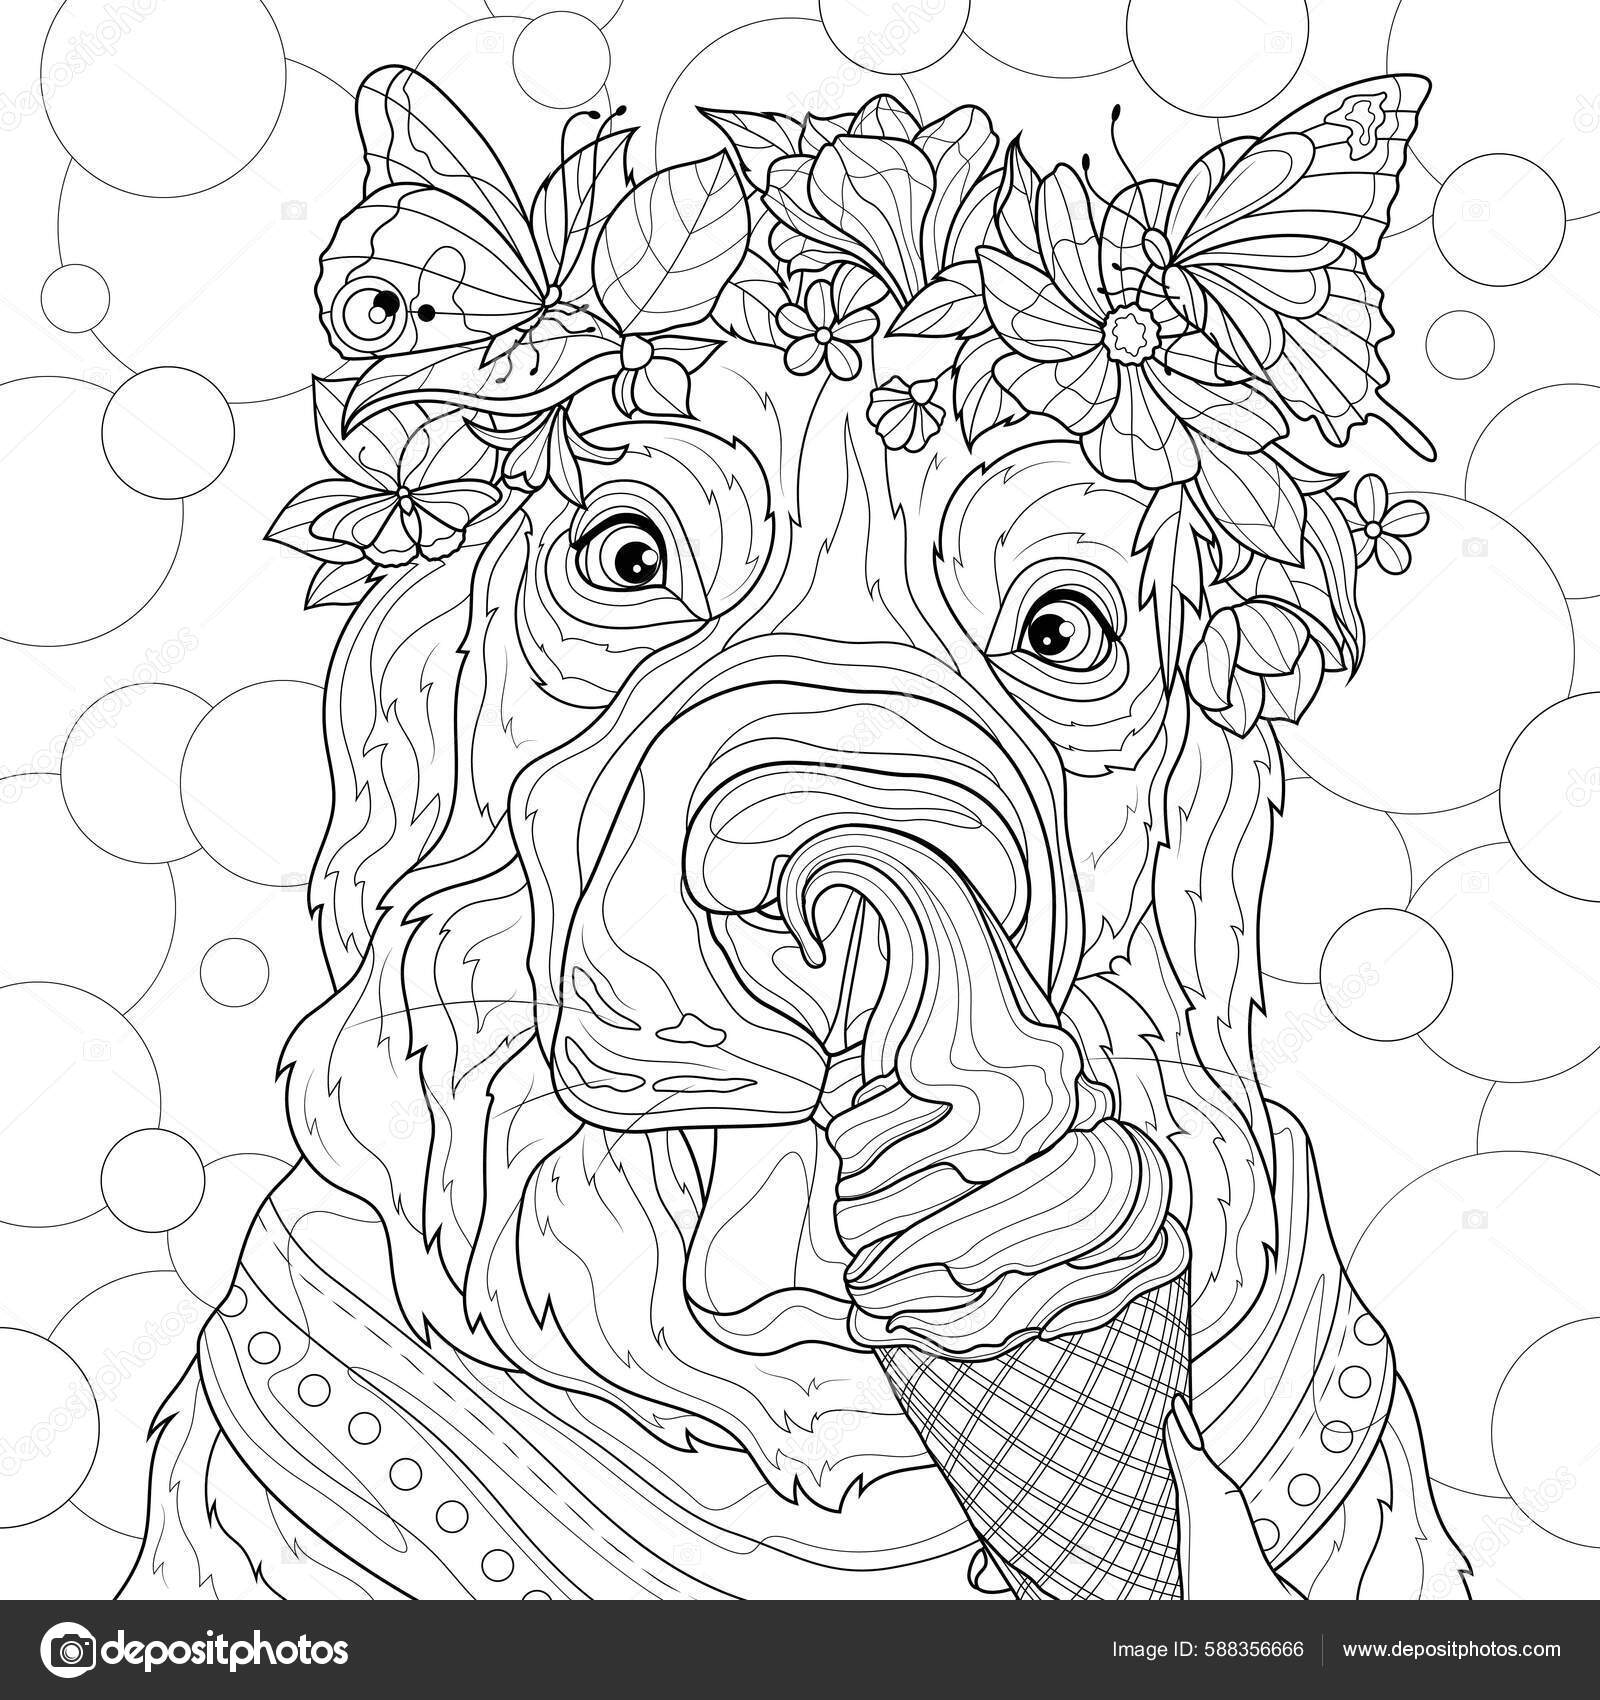 Flower Ice Cream Coloring Book : Flower Ice Cream Coloring Pages